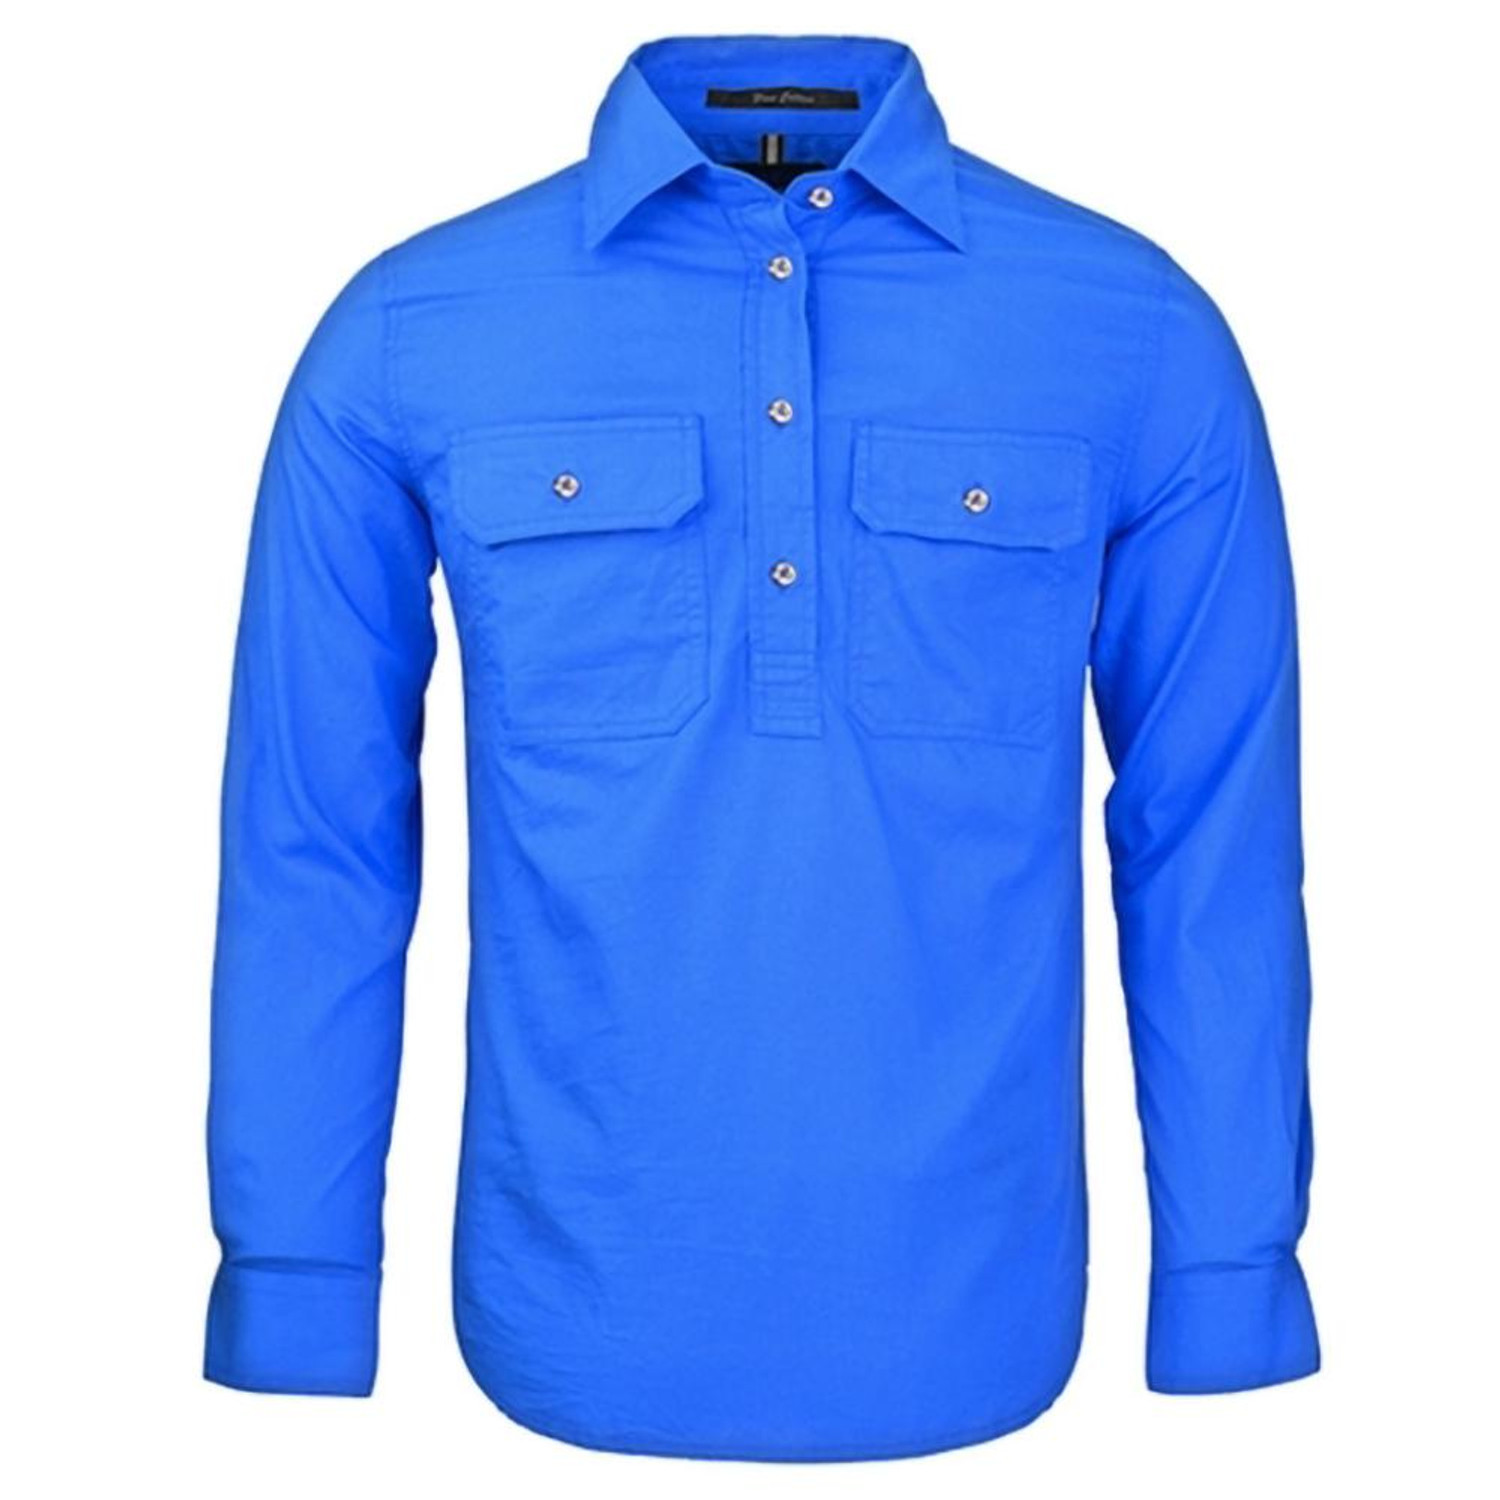 FREE EMBROIDERY - Ladies Cobalt Blue CLOSED FRONT Shirt buy 20